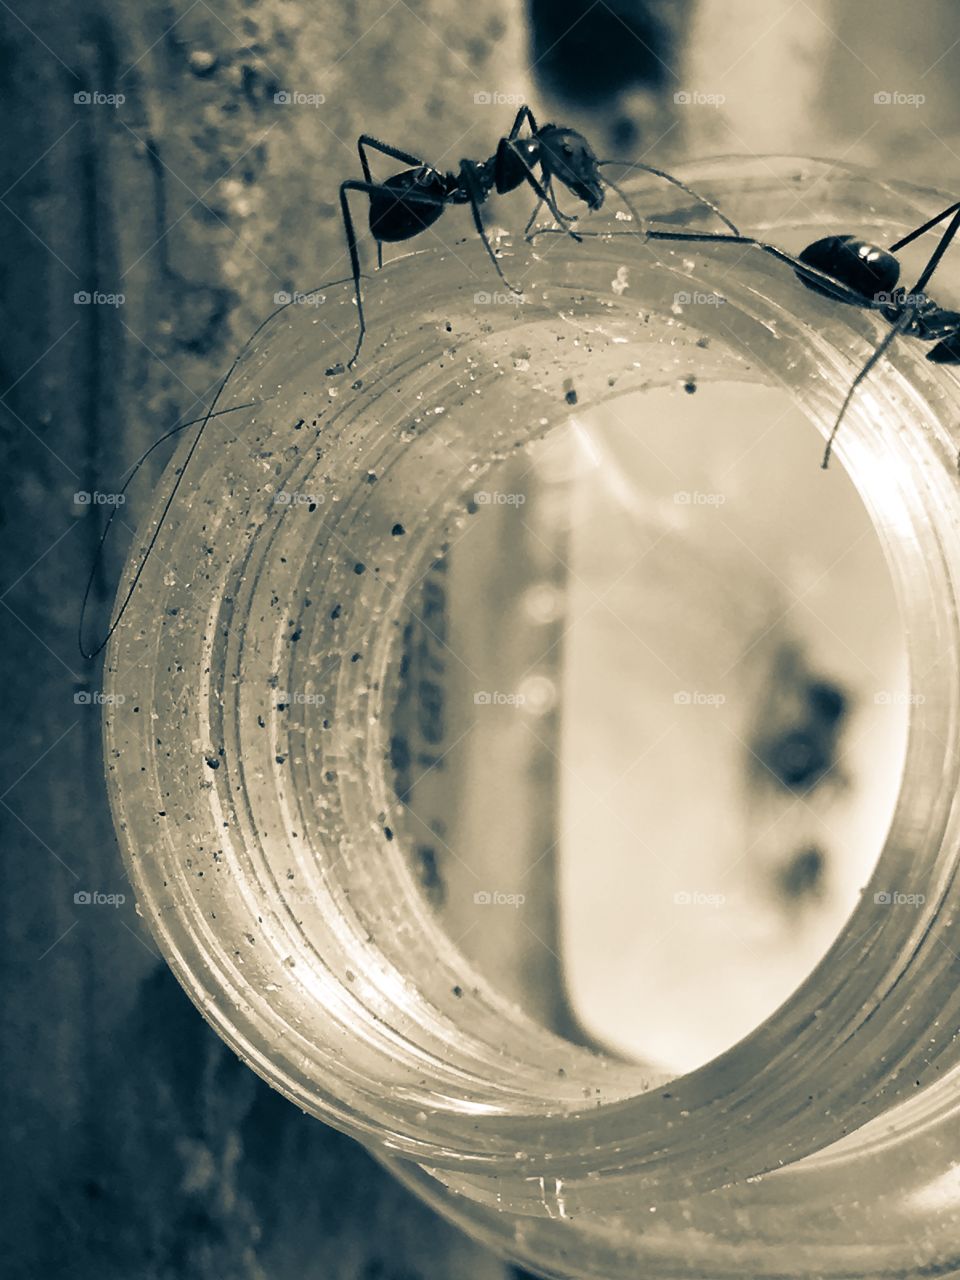 Two ants on outer rim of glass jar, blurred view of dead ants at bottom
Of jar 